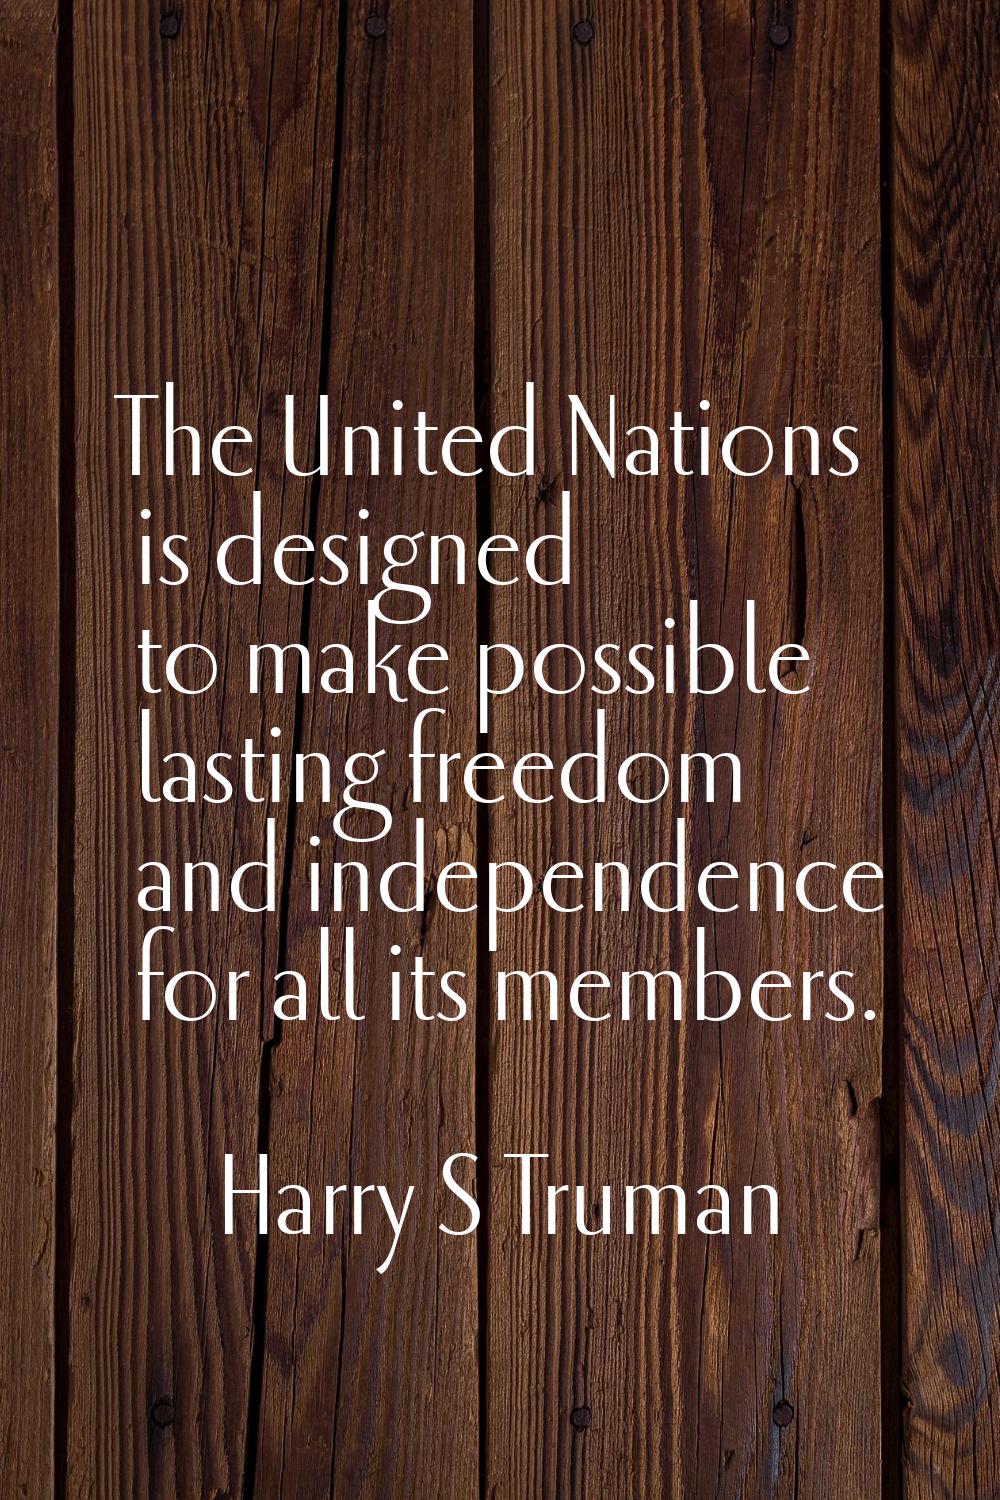 The United Nations is designed to make possible lasting freedom and independence for all its member